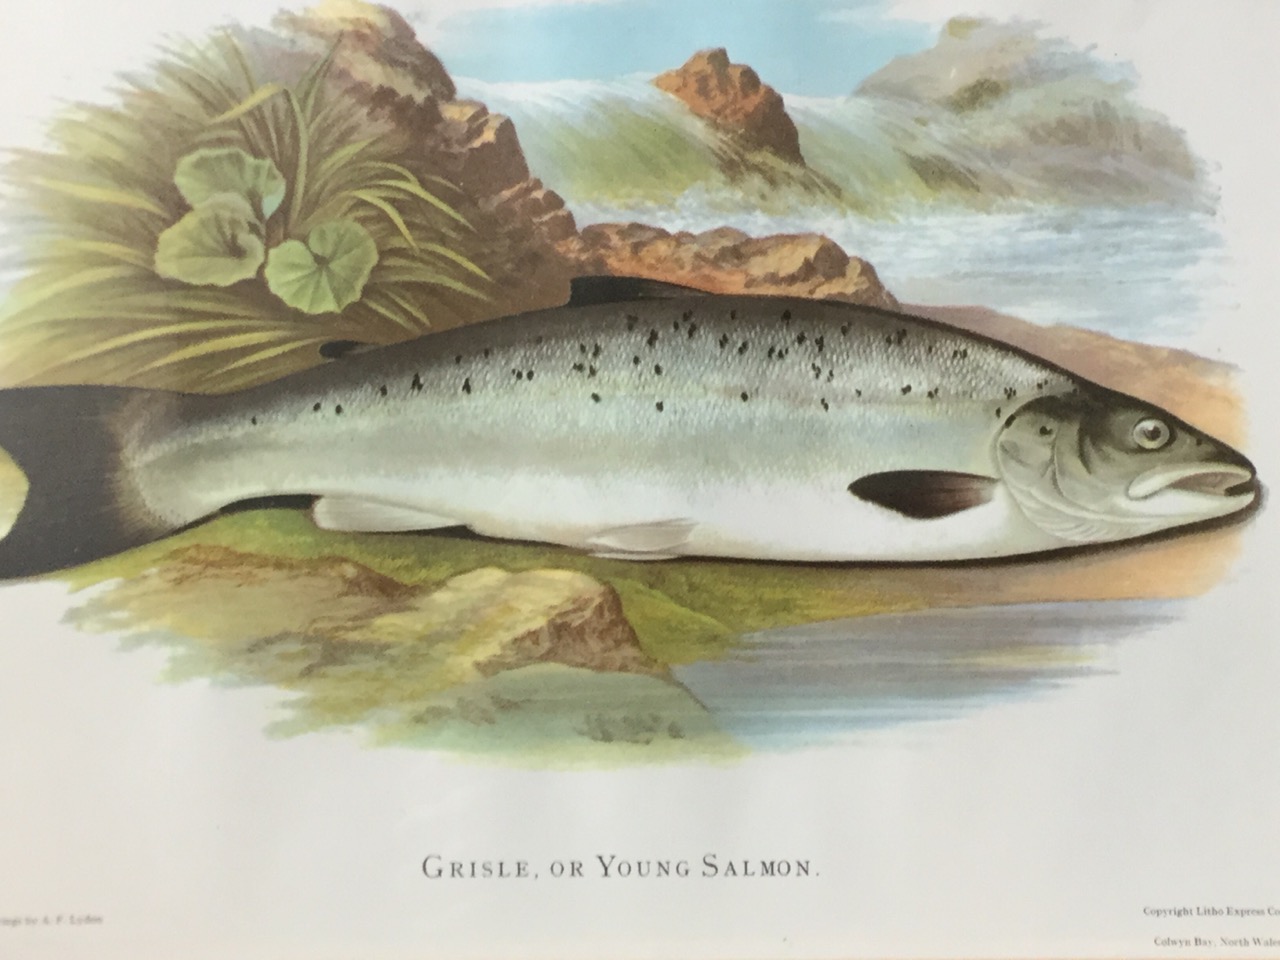 A set of four framed fish prints, Common Trout, Grisle, Galway Seatrout, and Salmon, the coloured - Image 3 of 6